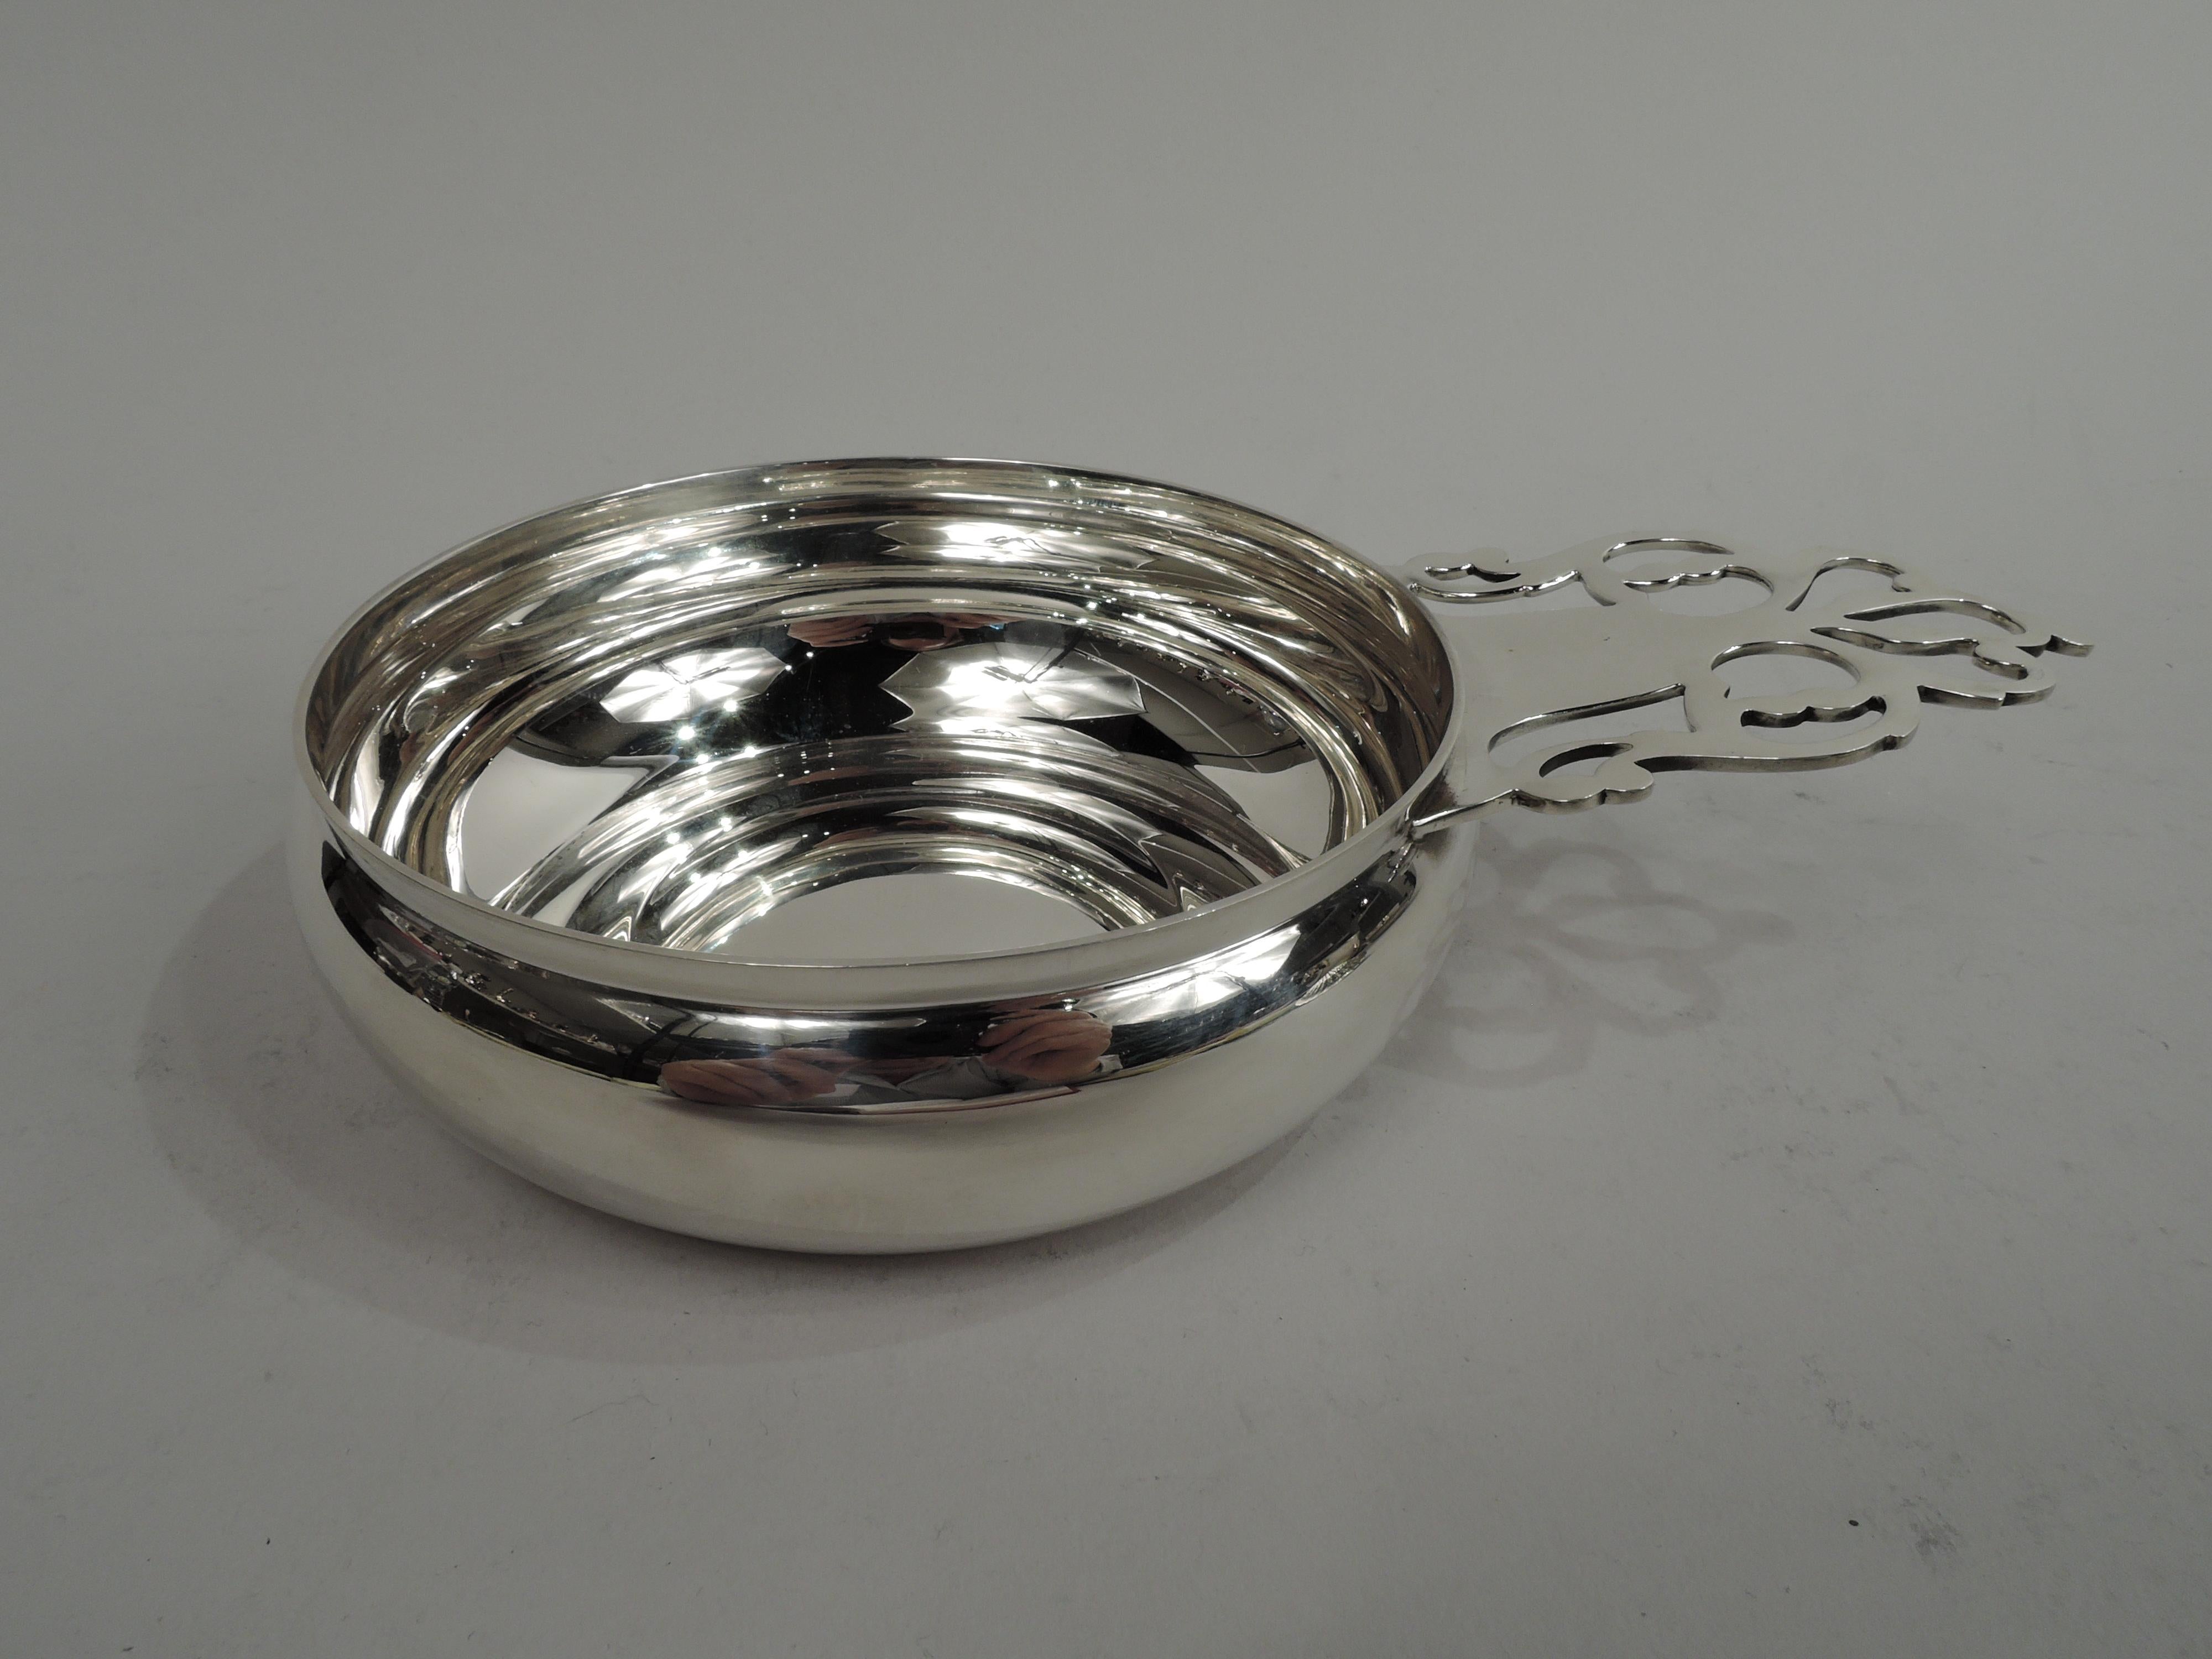 Colonial sterling silver porringer. Made by Tiffany & Co. in New York. Round and curved bowl with open tree handle. Traditional with room for engraving. Fully marked including maker’s stamp, pattern no. 19206, and director’s letter M (1947-56) as